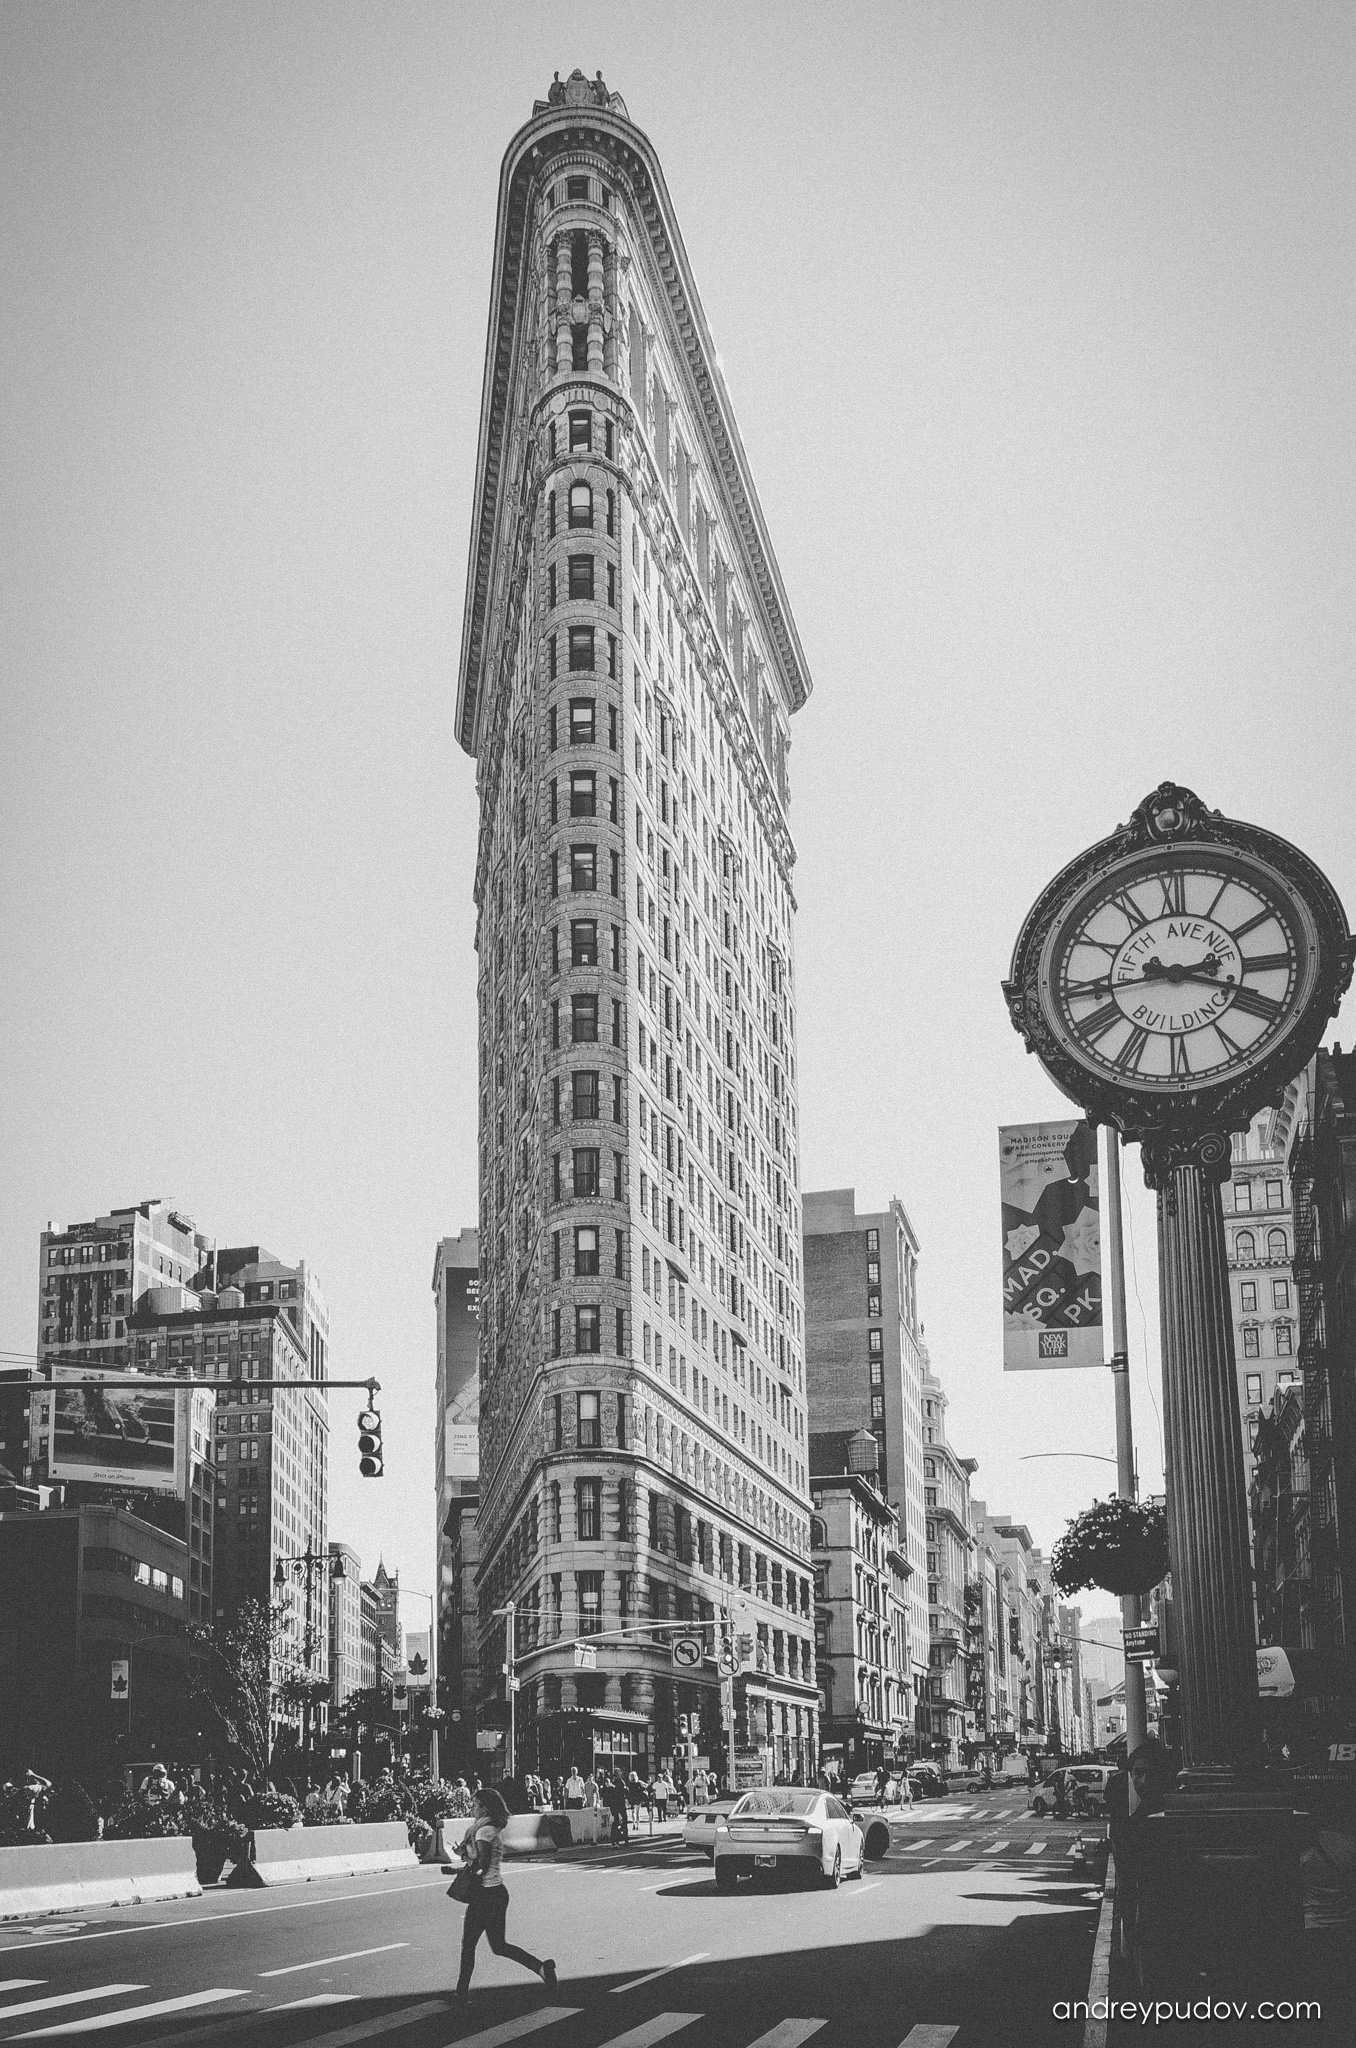 Conquering America 2.0 - Flatiron Building is a triangular 22-story steel-framed landmarked building located at 175 Fifth Avenue in the borough of Manhattan, and is considered to be a groundbreaking skyscraper.